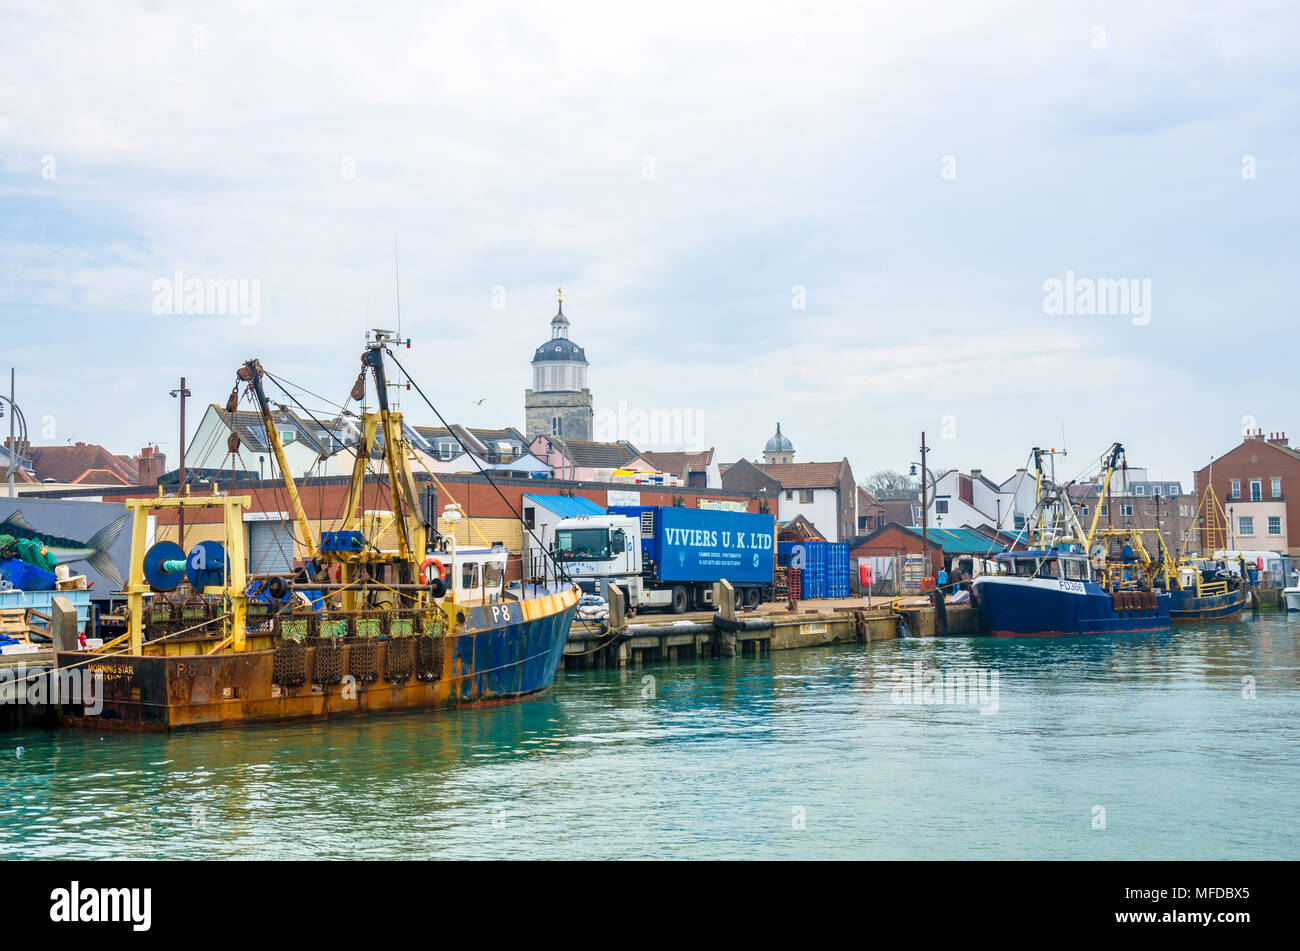 Fishing trawlers 'Morning Star' and 'Providing Star'  moored against the harbour wall in Portsmouth, UK. Stock Photo